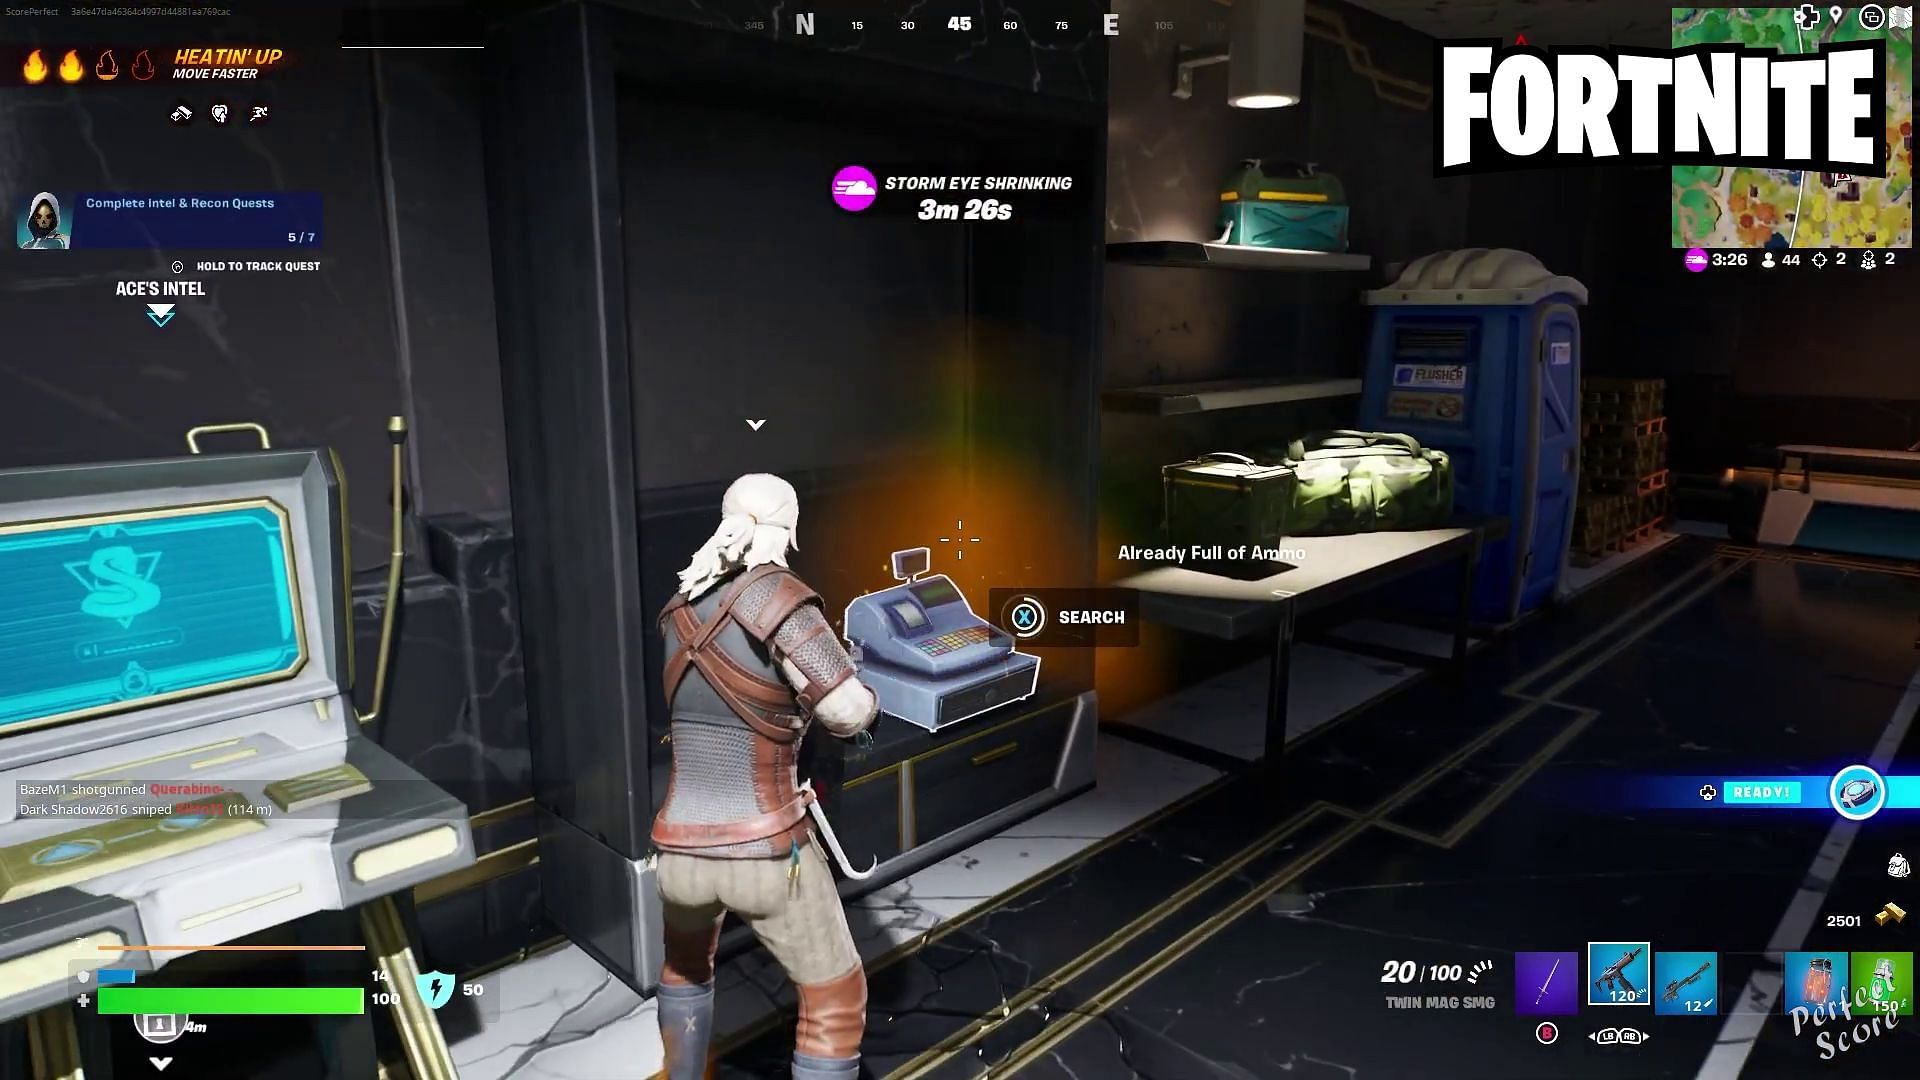 Search safes or cash registers to complete the quest (Image via YouTube/PerfectScore)